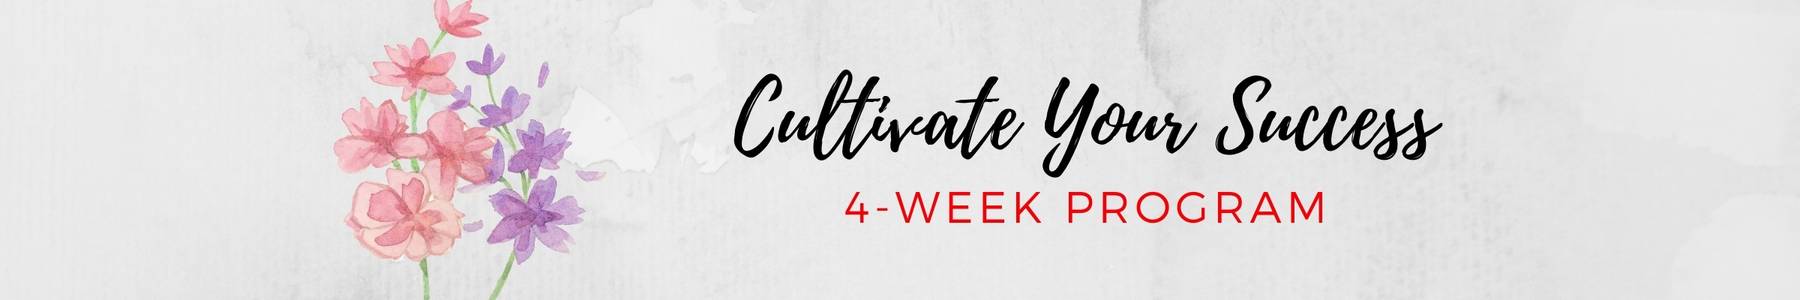 Cultivate Your Success - 4 Week Coaching Program